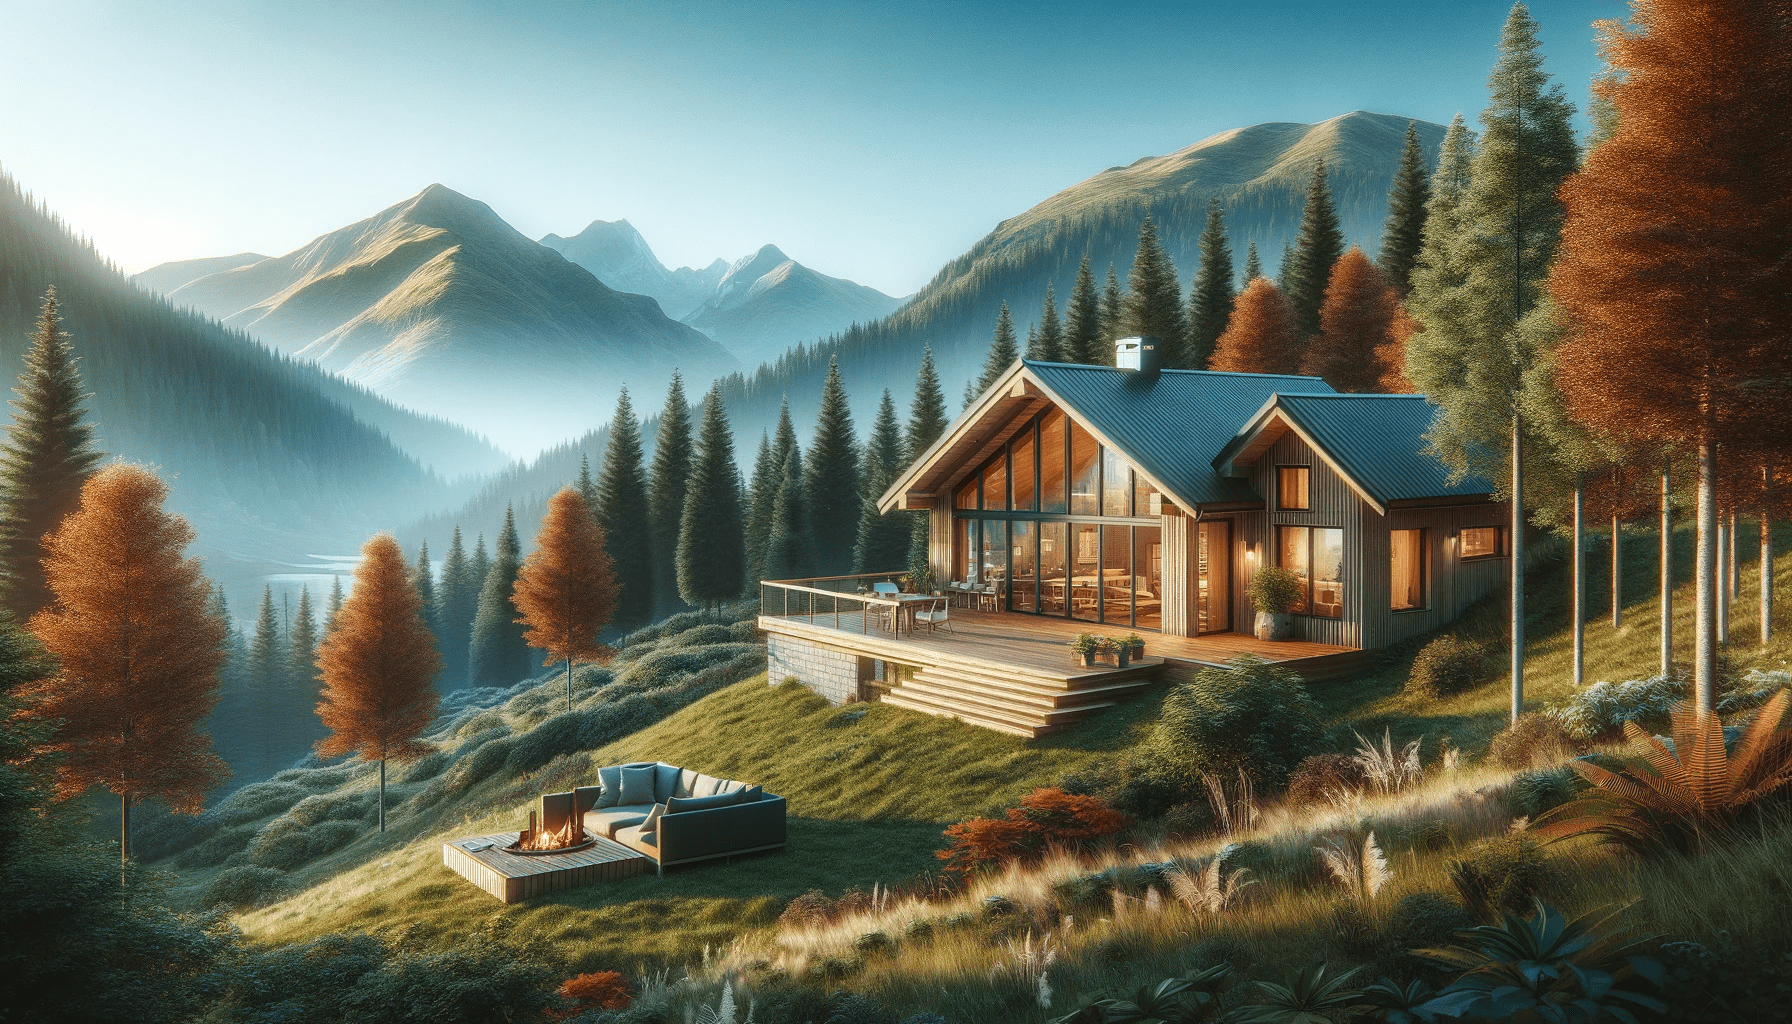 cozy mountain retreat with a modern cabin surrounded by lush forests. The cabin should feature large windows offering a stunning view of the mountai